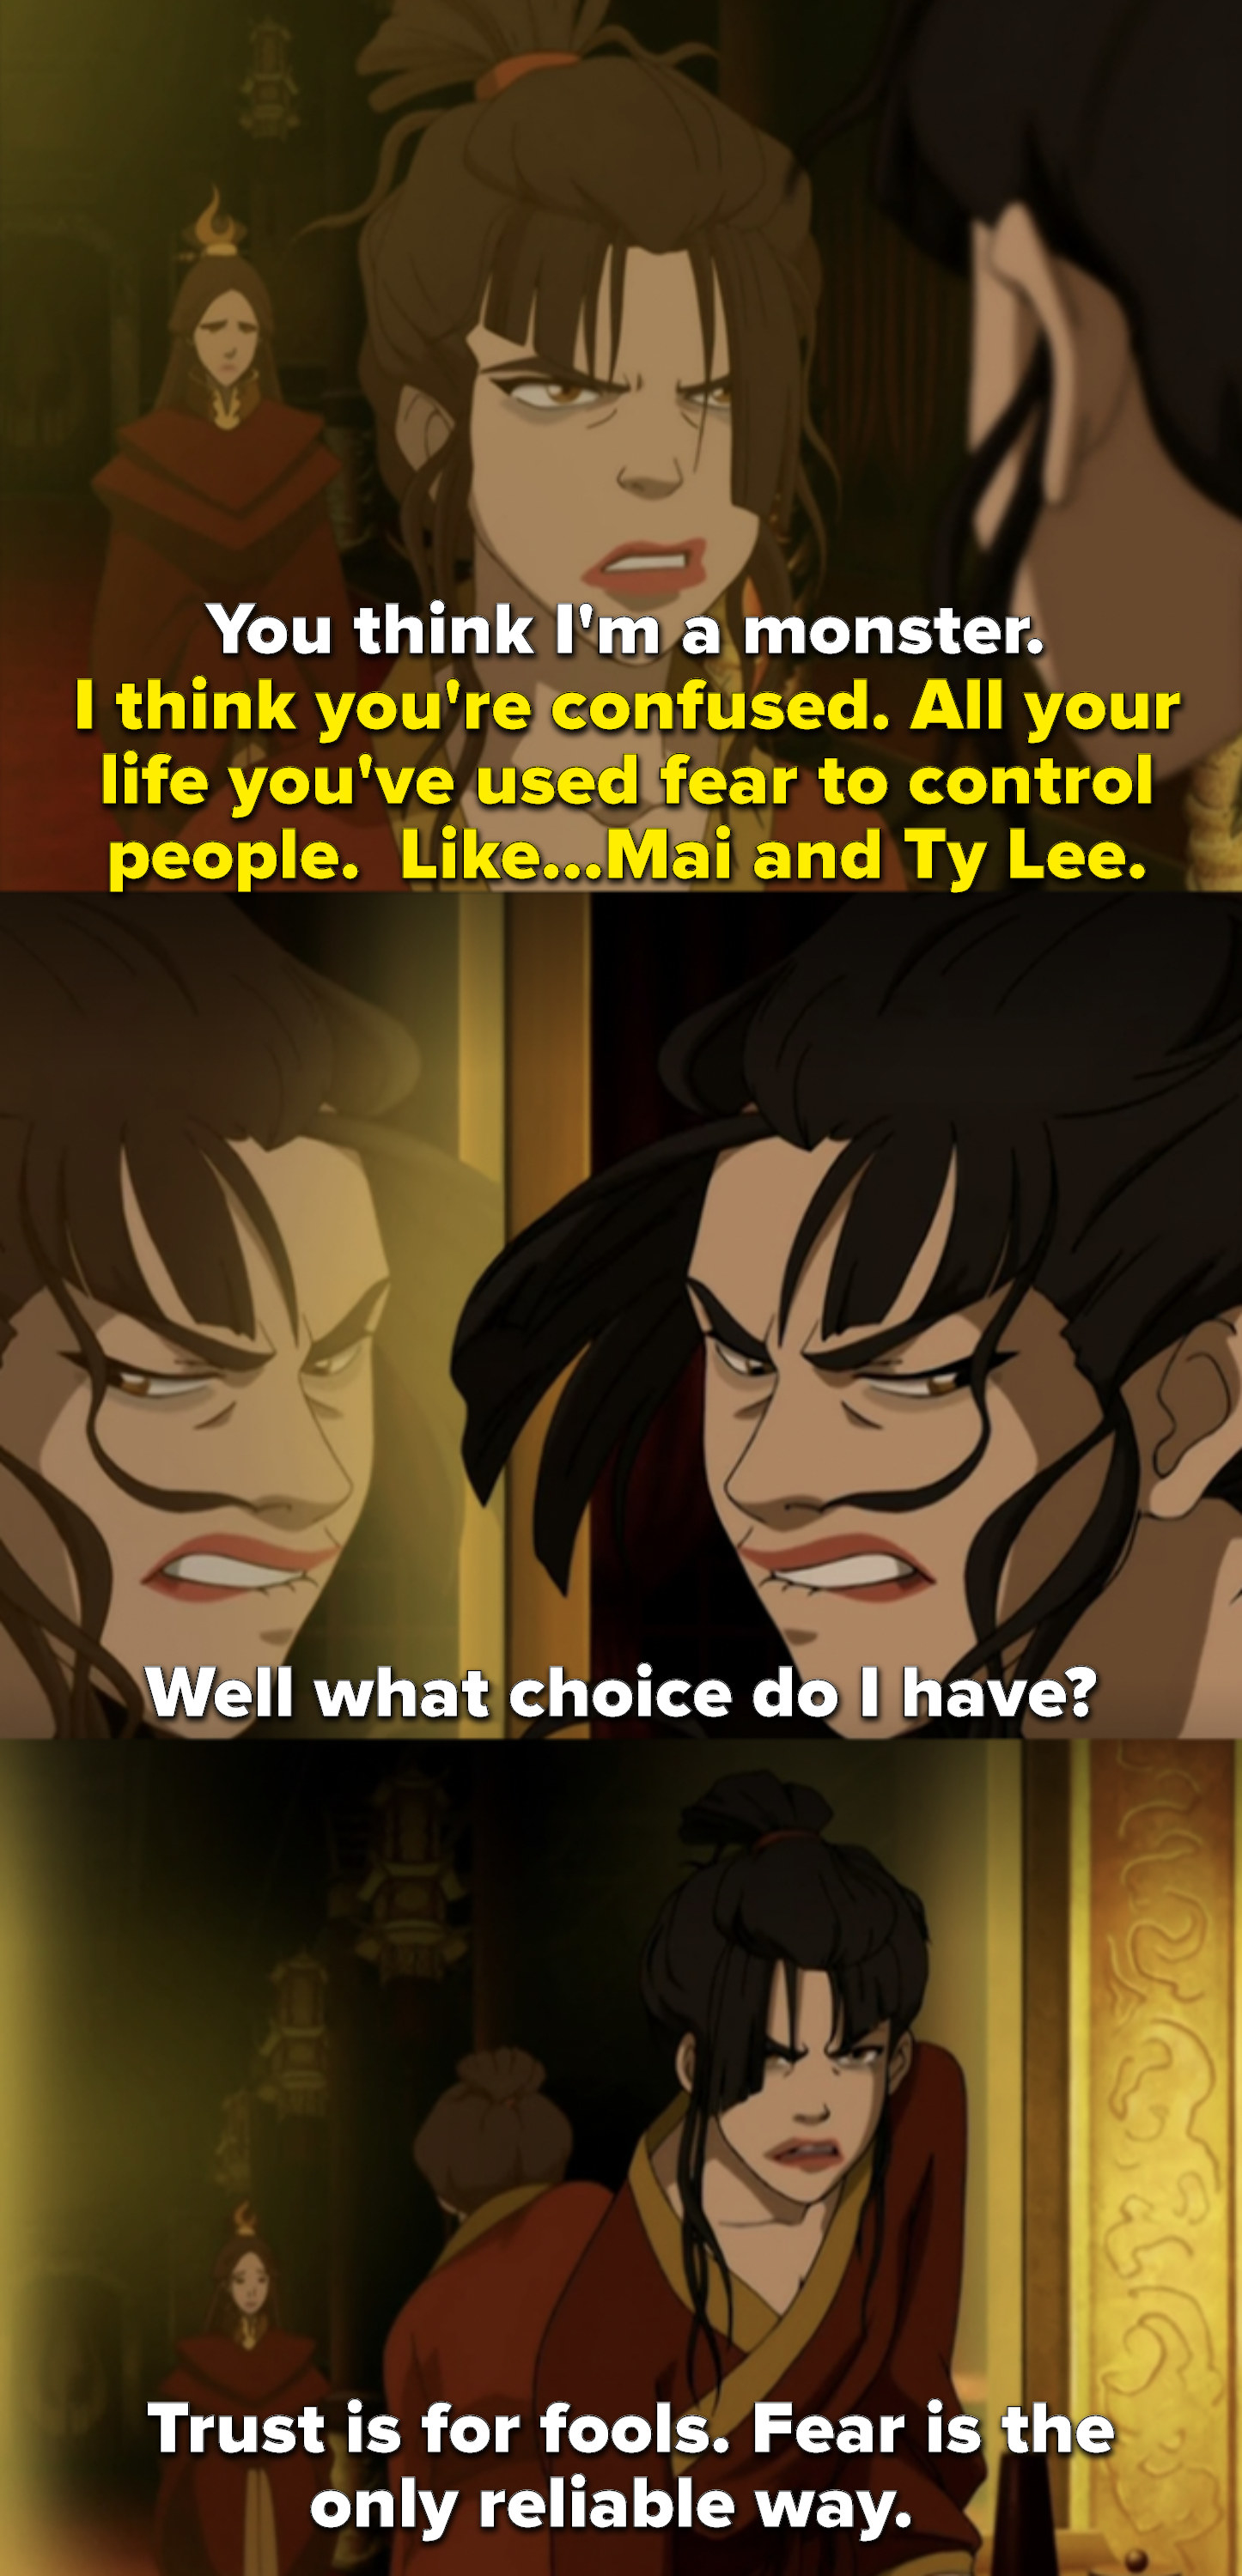 Azula yells at an apparition of her mother in the mirror, saying even she fears her